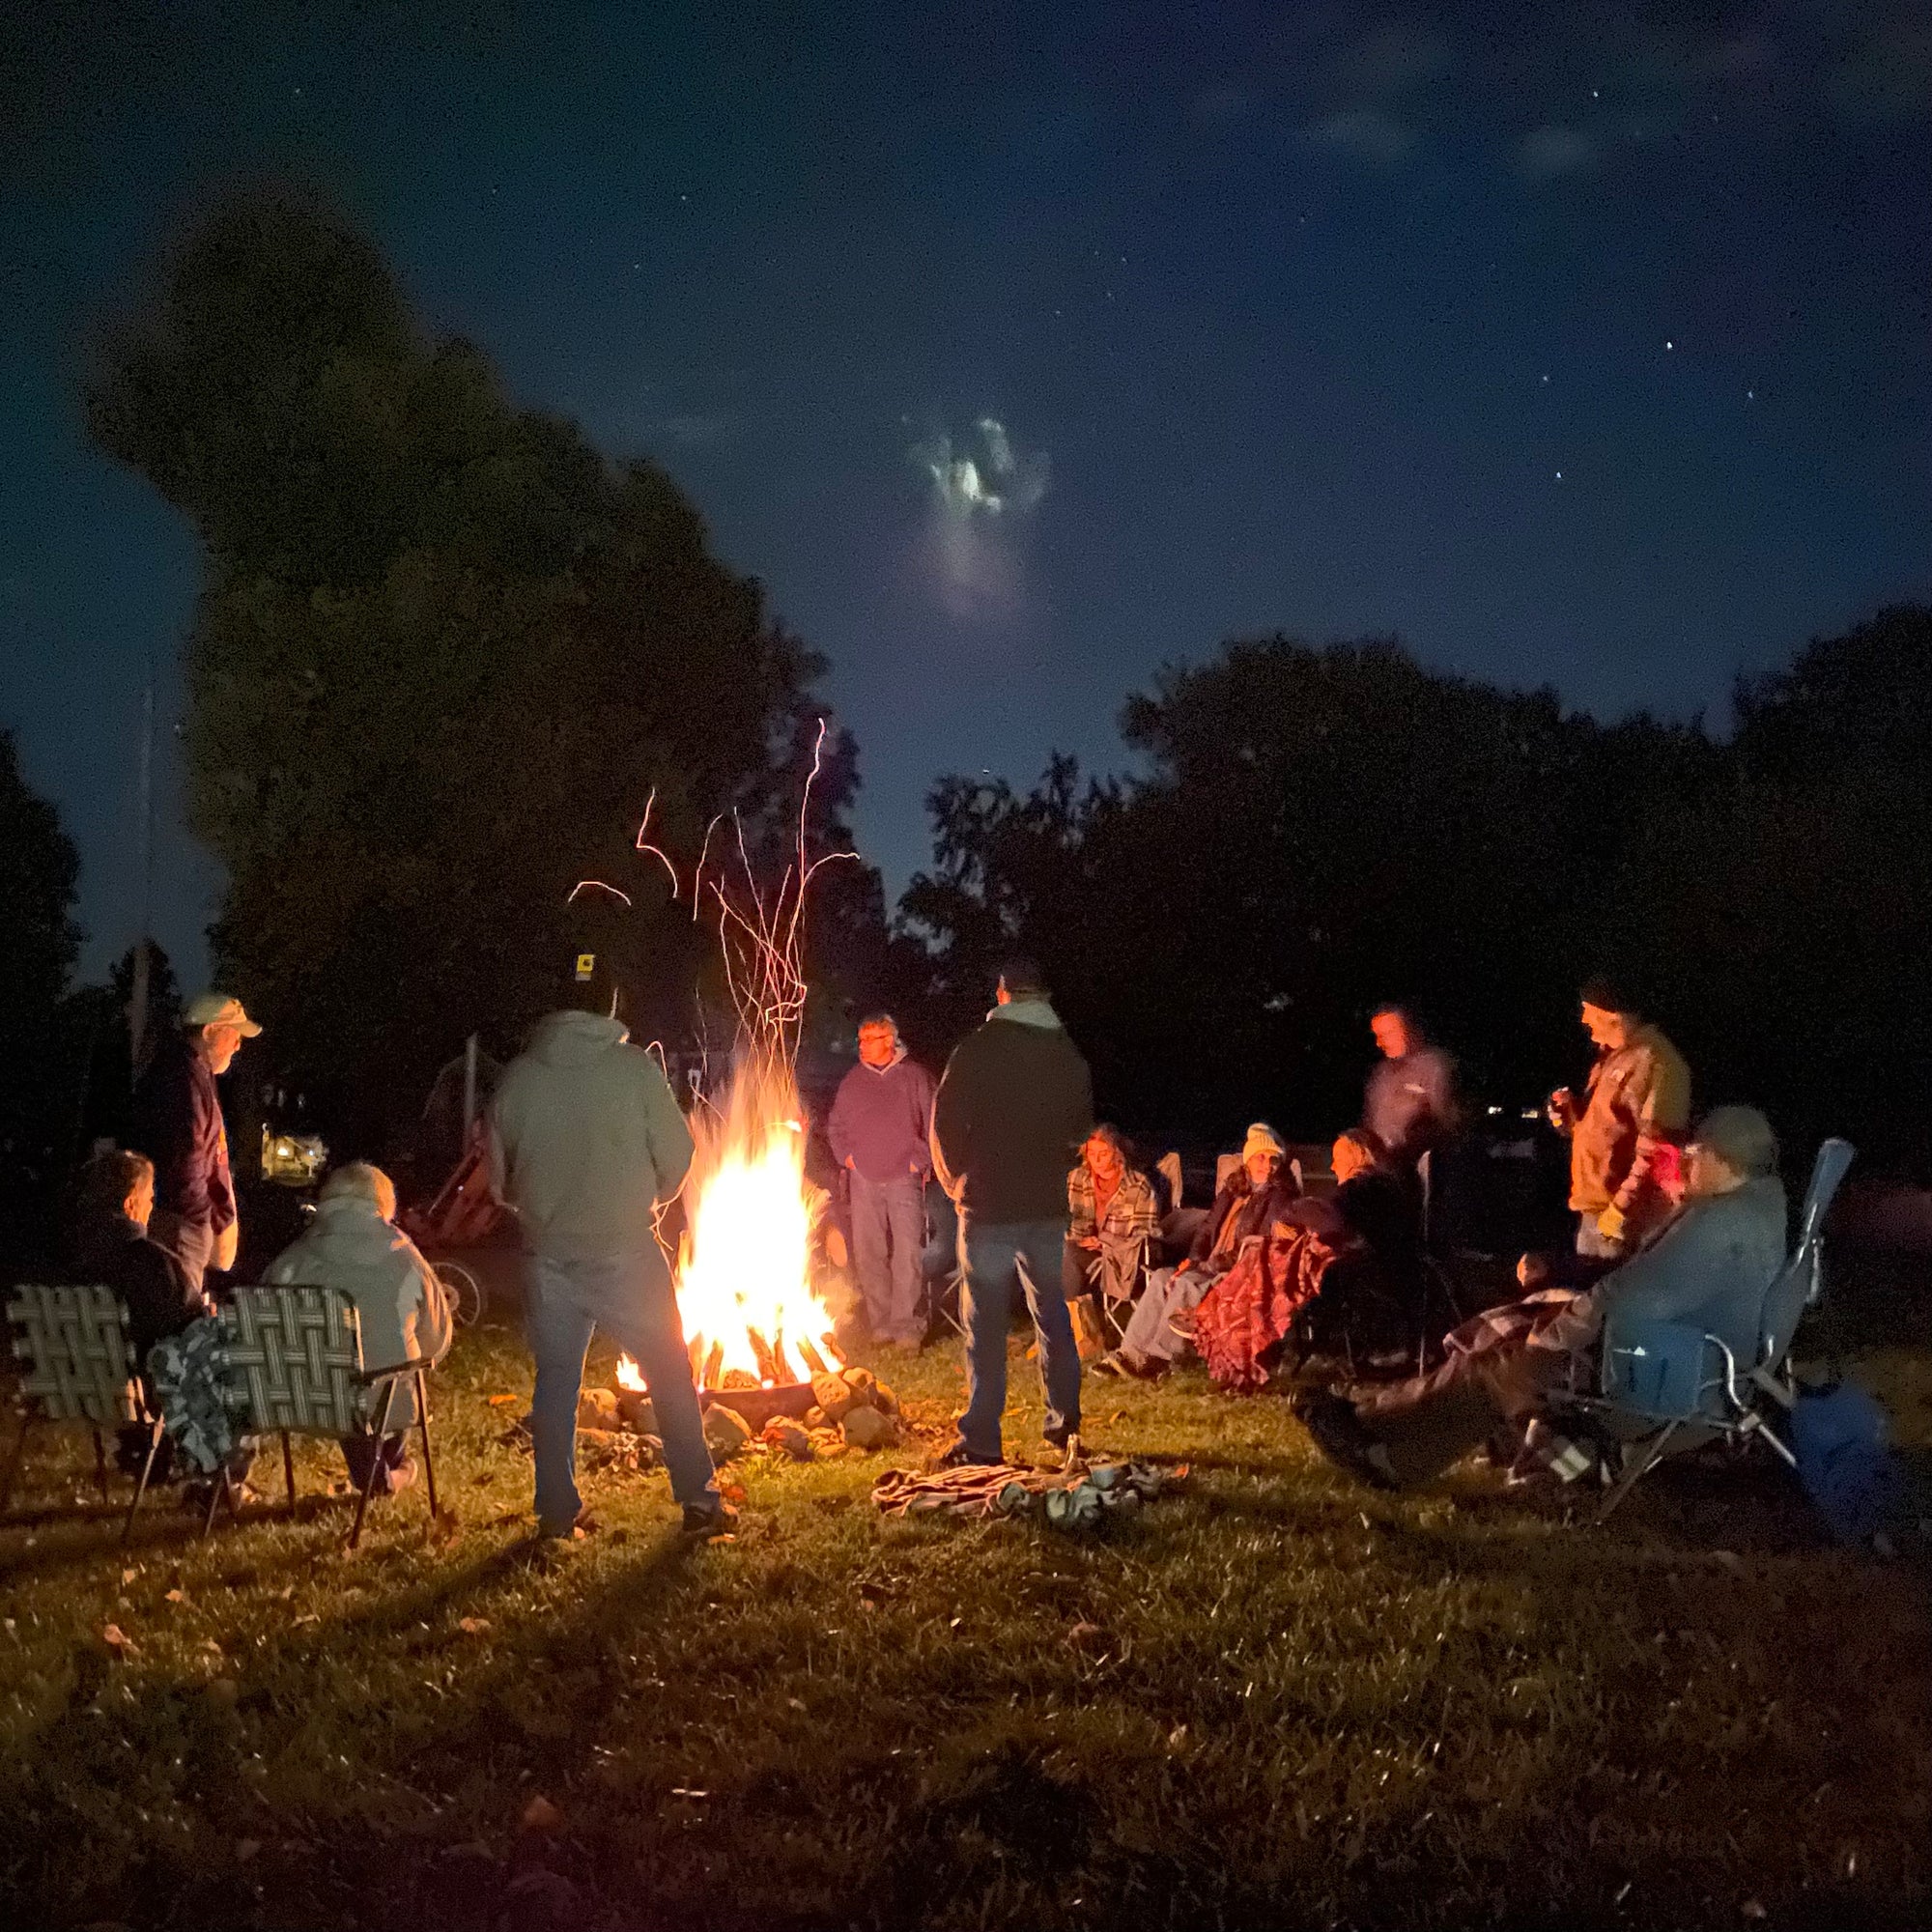 a group of friends gathered around a campfire in the dark